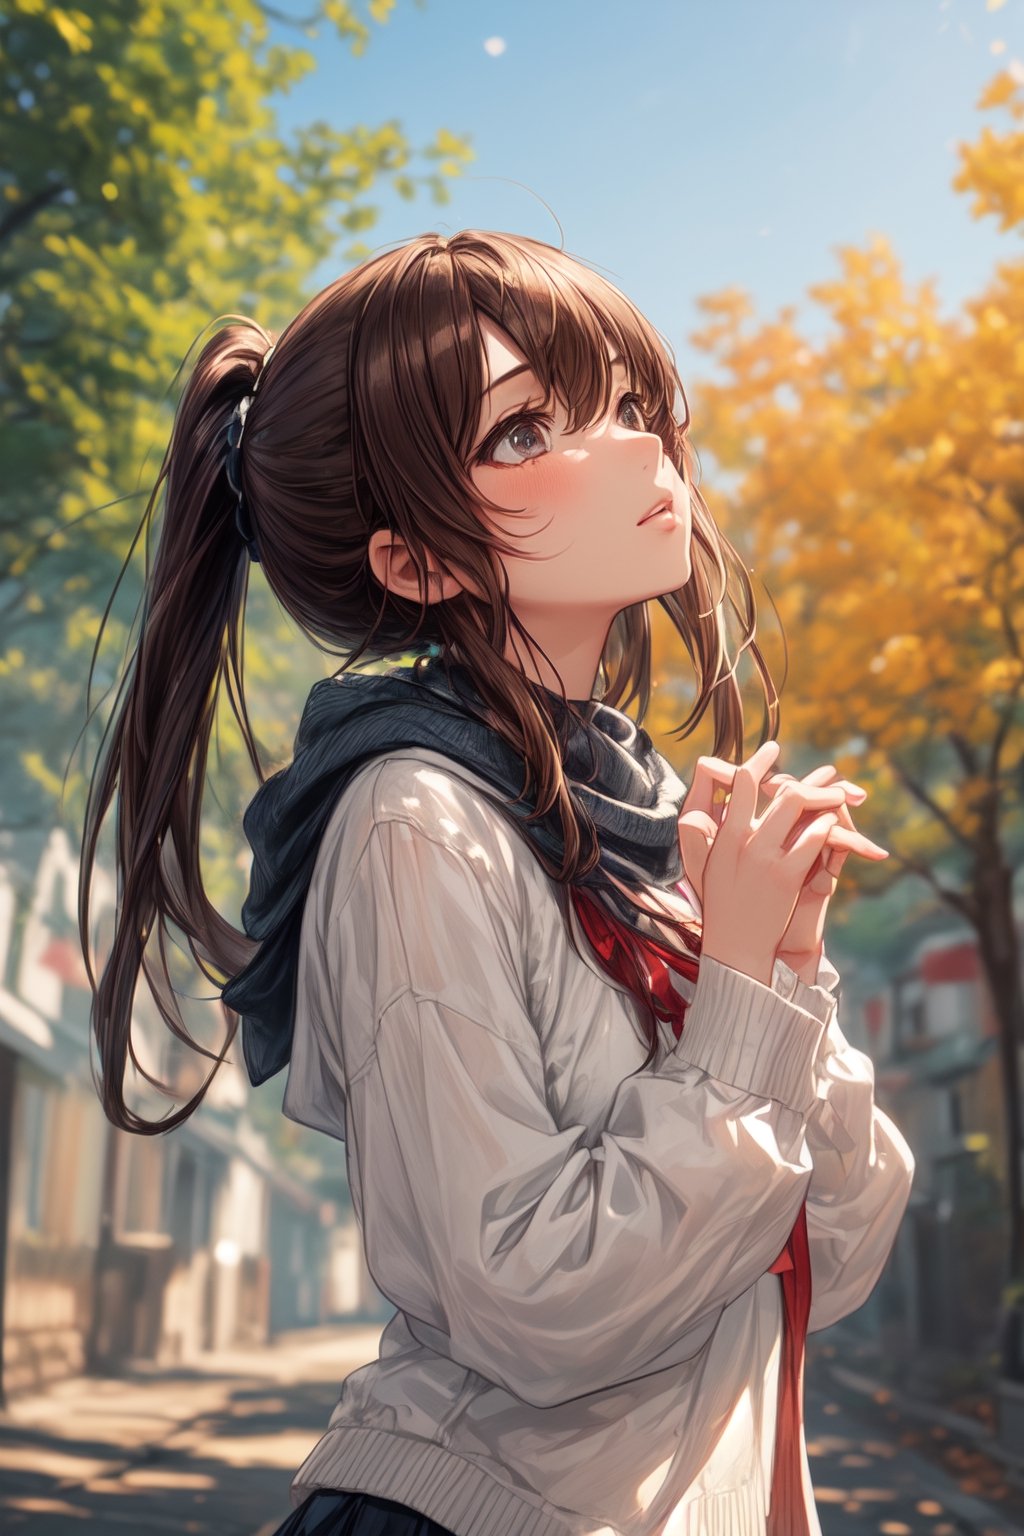 Anime-style illustration of a high school girl with a ponytail, standing amidst vibrant autumn trees. She wears a cozy sweater and scarf, looking up with her hands shielding her eyes as if spotting a particularly beautiful tree branch.